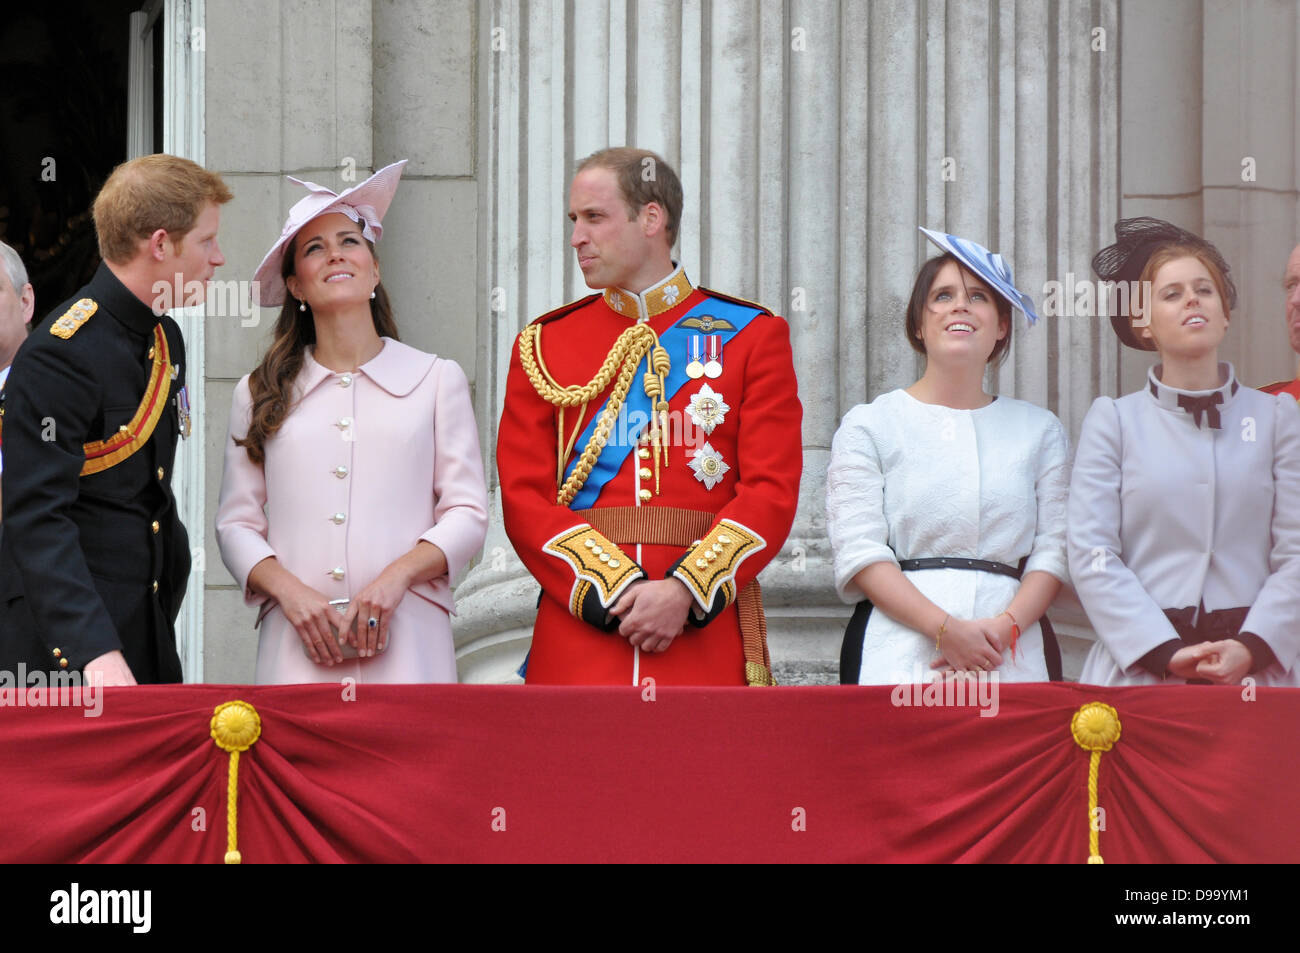 Prince Harry, Kate Middleton, Prince William watching the Queen's Birthday Flypast from the balcony of Buckingham Palace after Trooping the Colour 2013. Eugenie & Beatrice. Princes Harry and William in military uniform Stock Photo